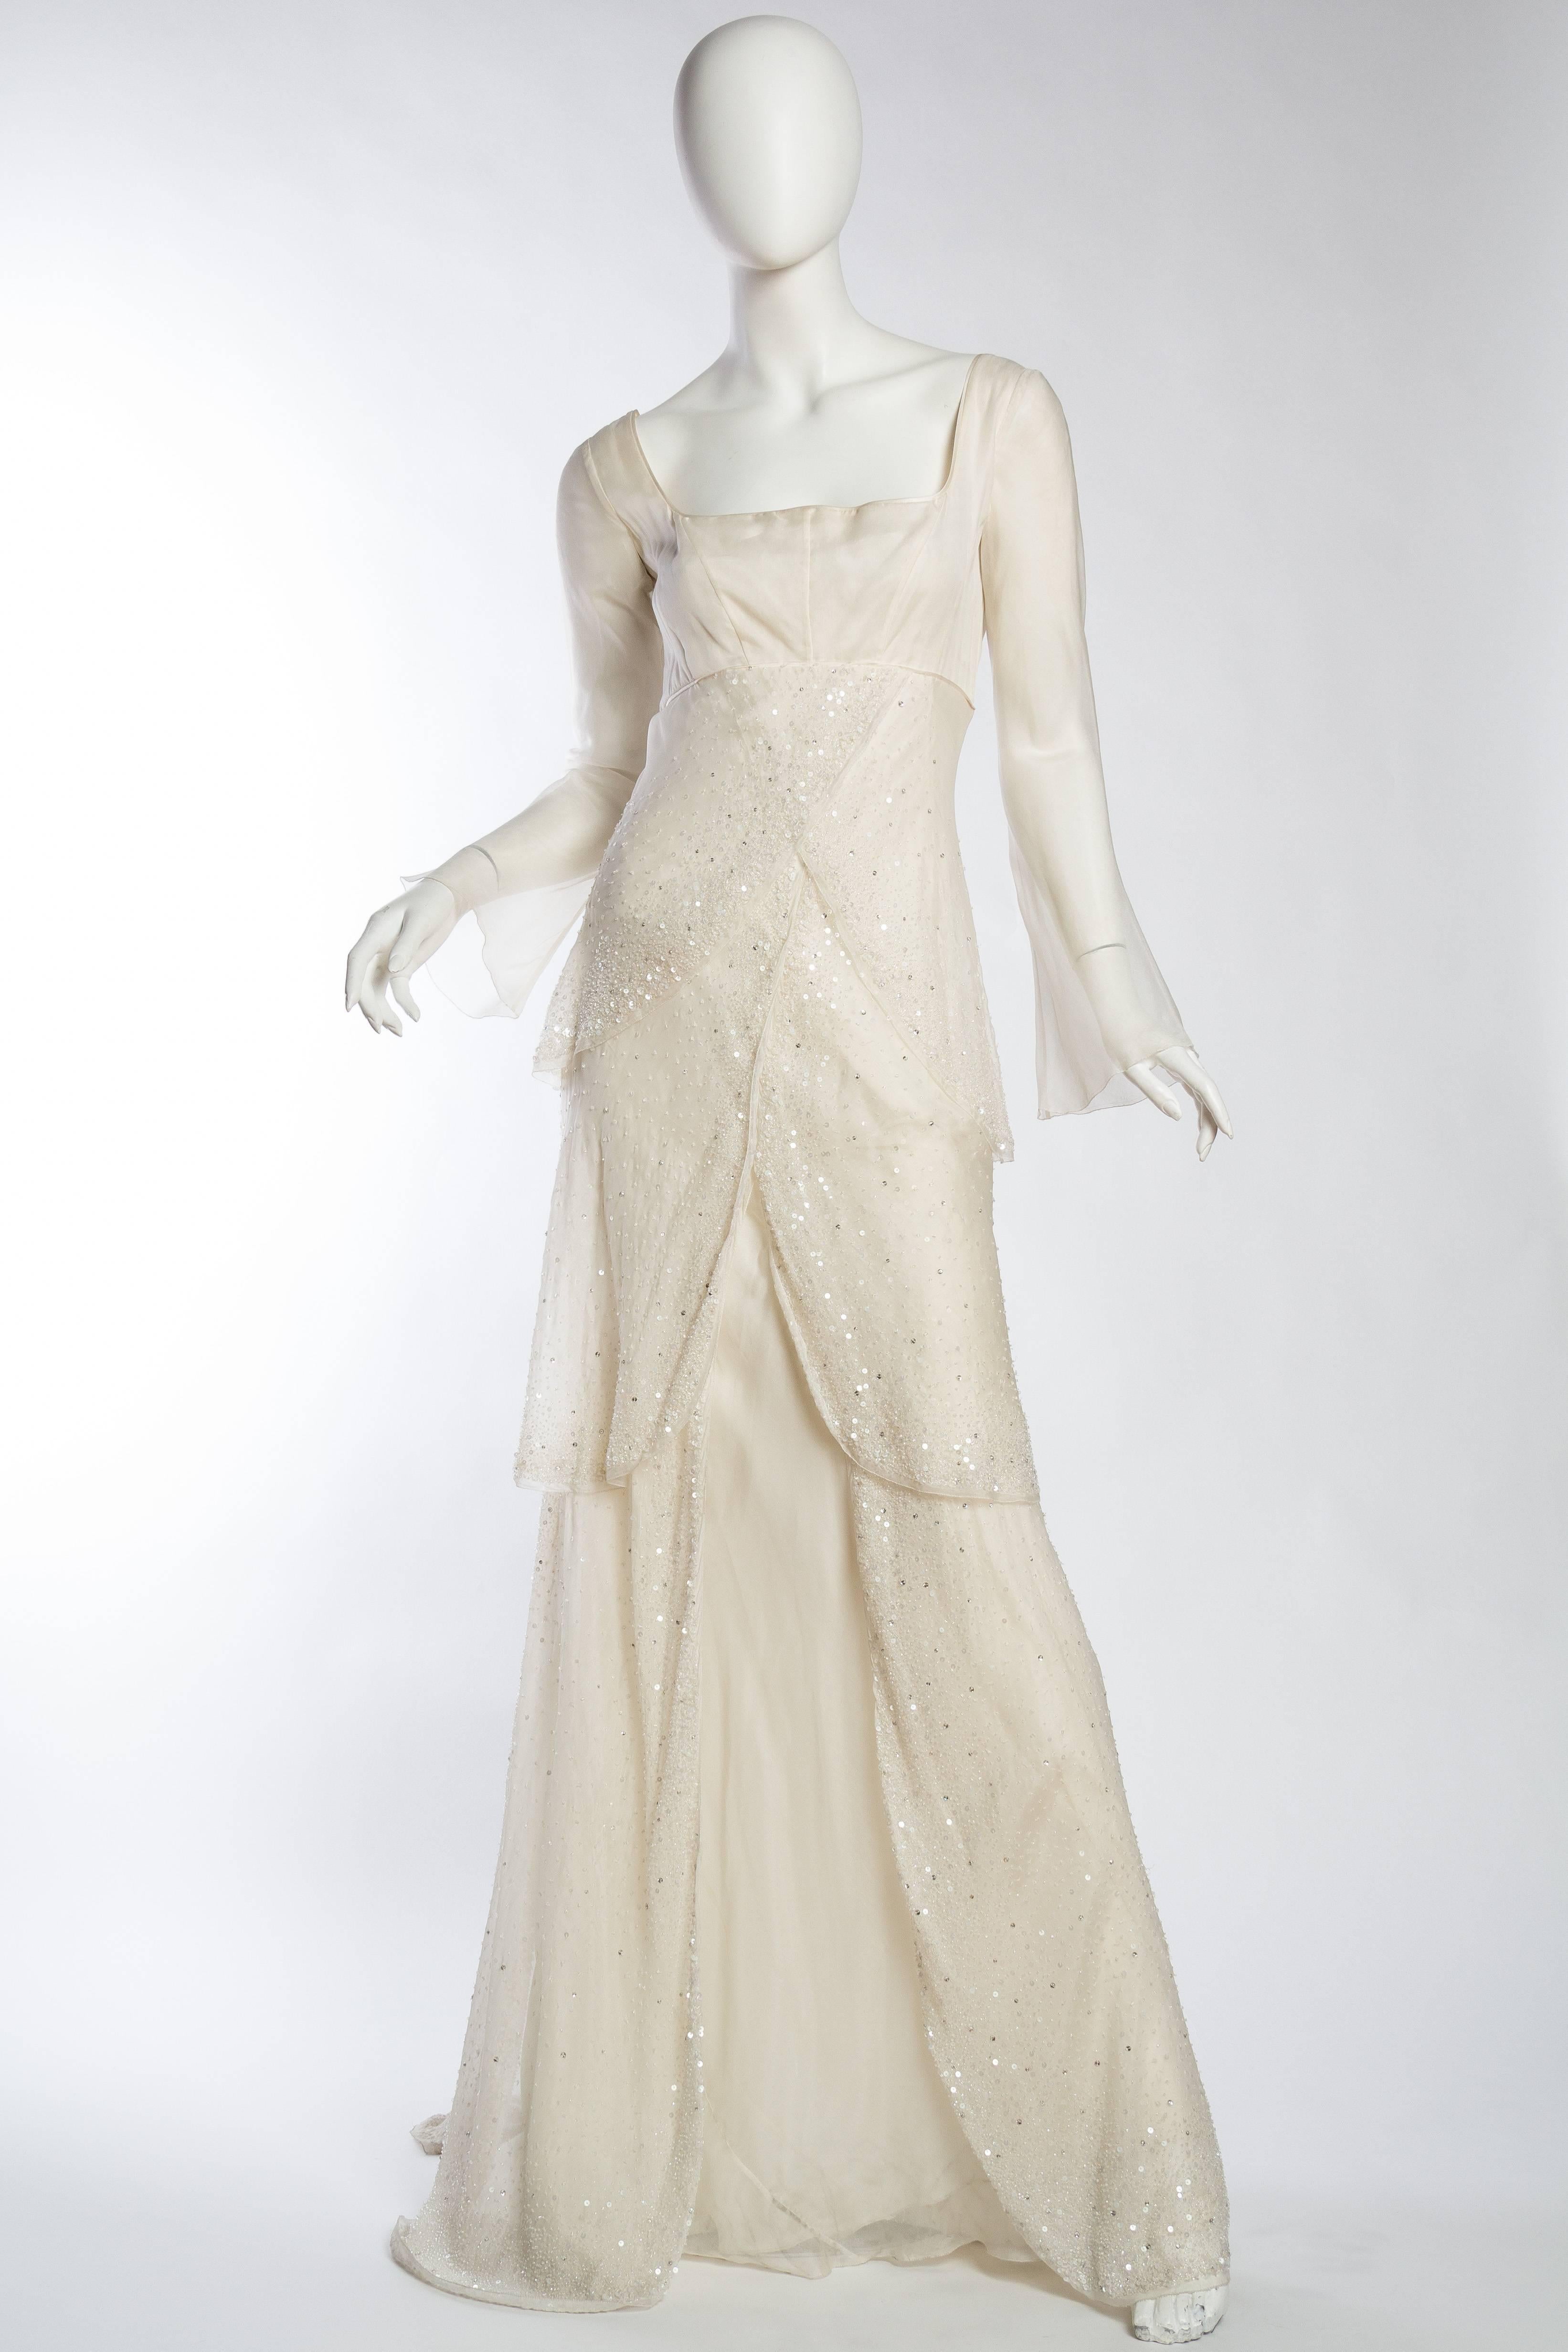 1990S ALBERTA FERRETTI Cream Bias Cut Silk Charmeuse & Organza Medieval Inspired Bridal Trained Gown Covered In Beads Crystals